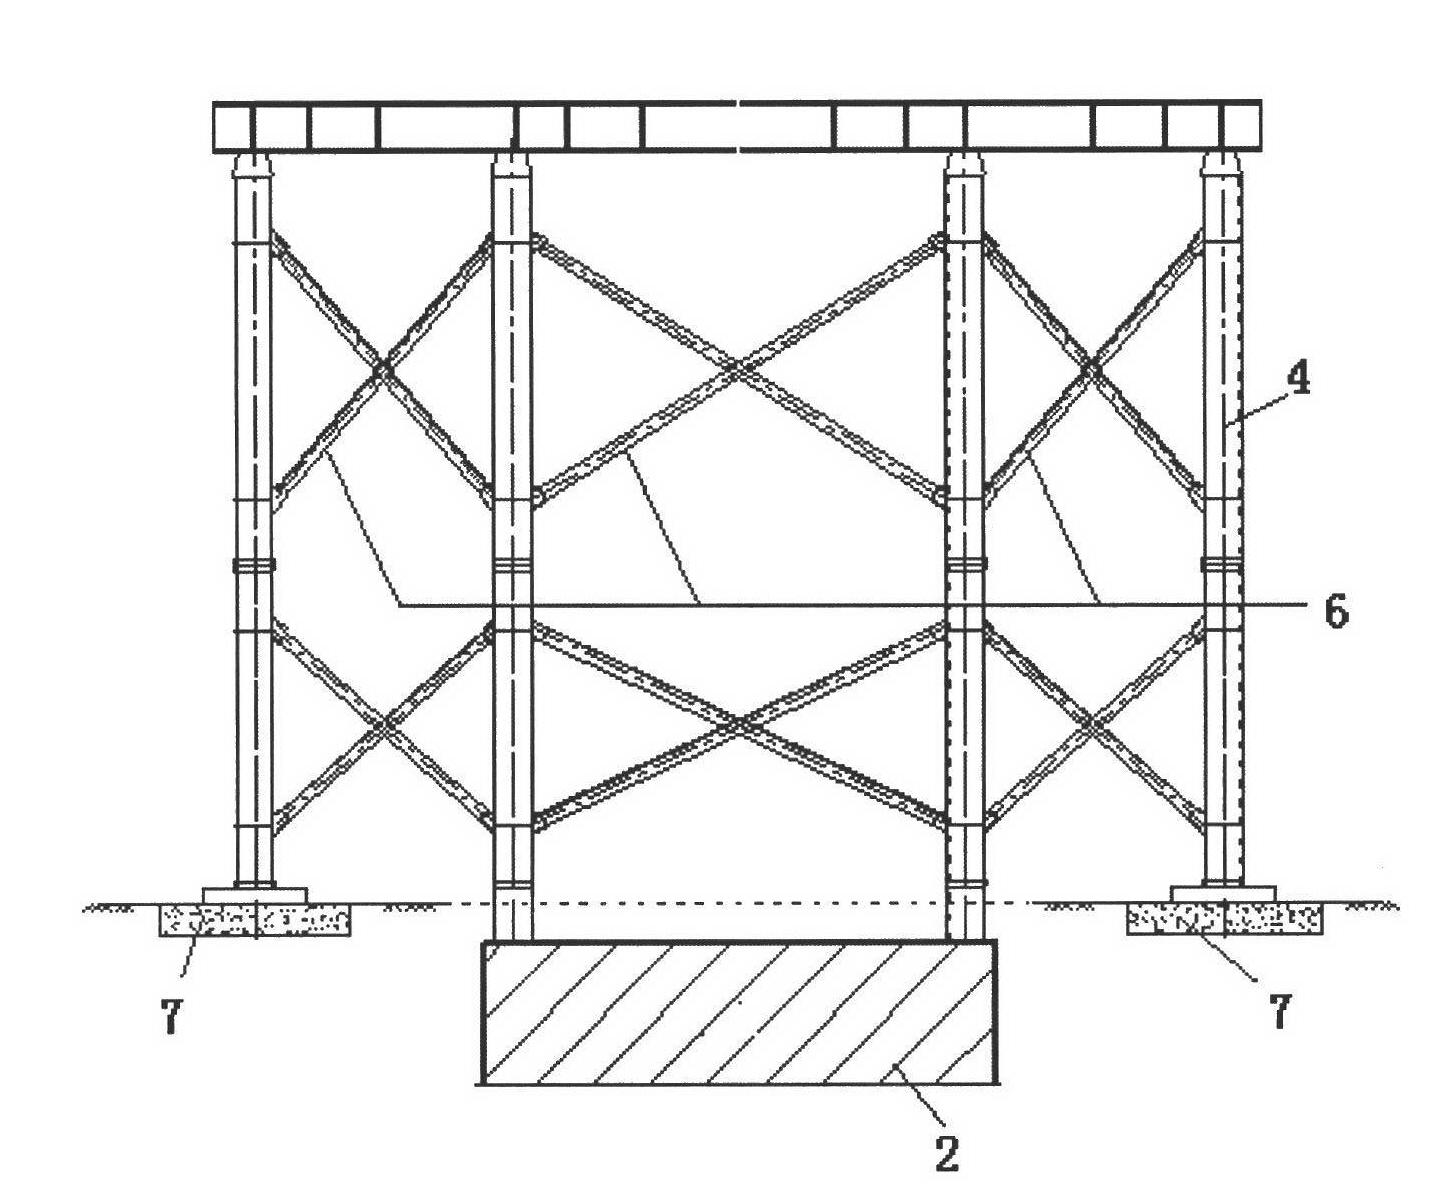 Simply supported-continuous construction method for bridge superstructure